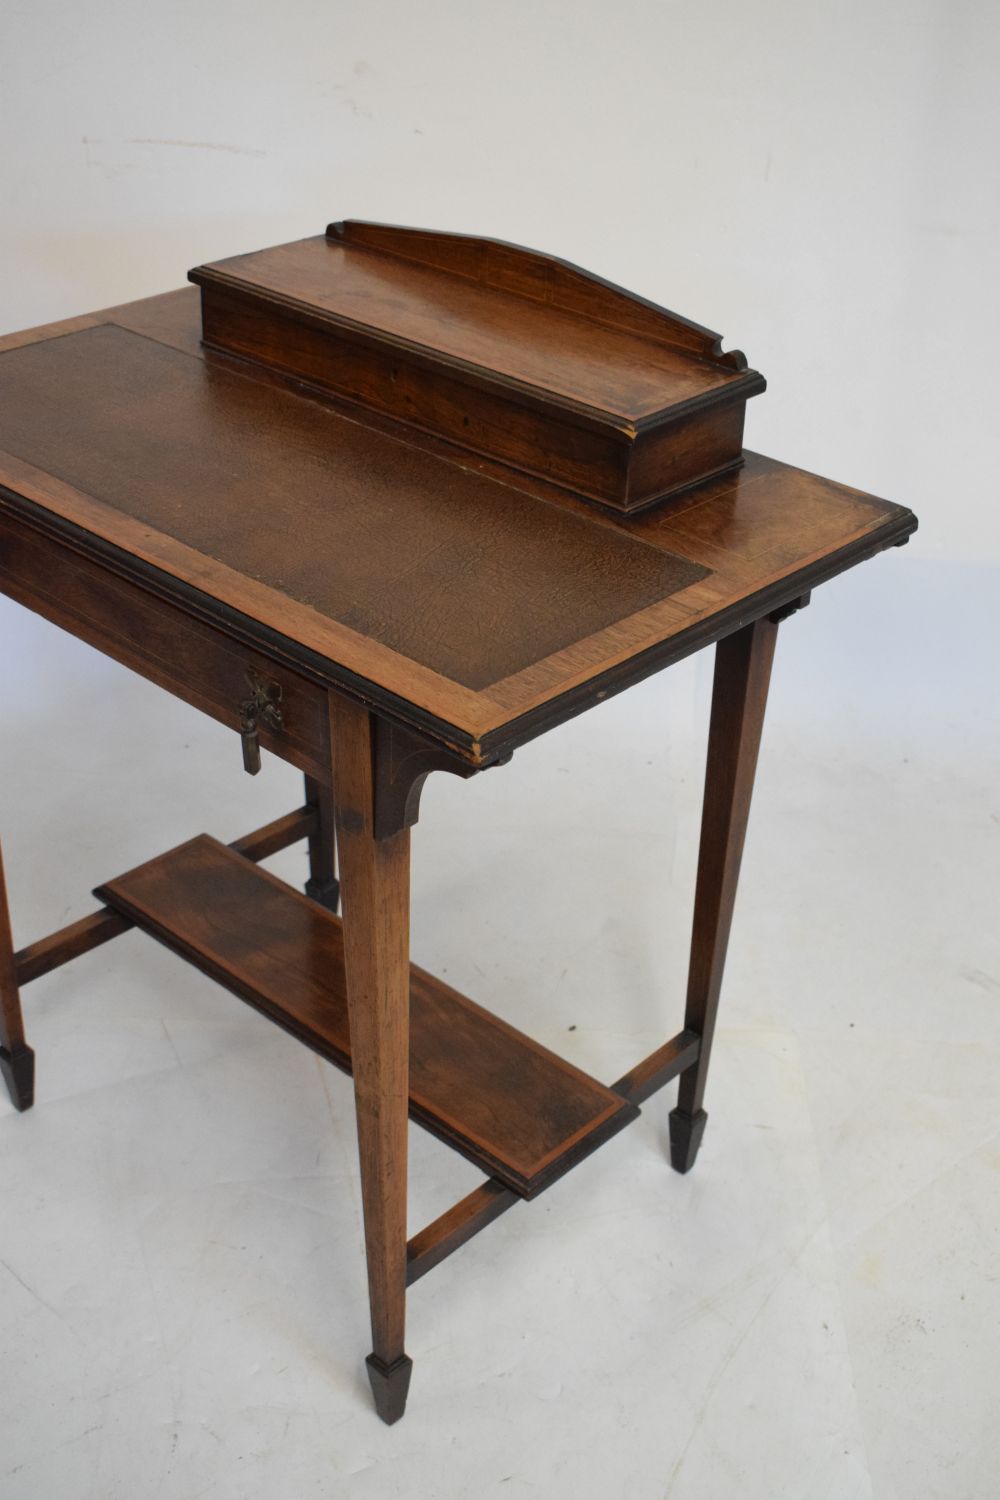 Edwardian inlaid rosewood writing table, with hinged superstructure enclosing stationery divisions - Image 3 of 6